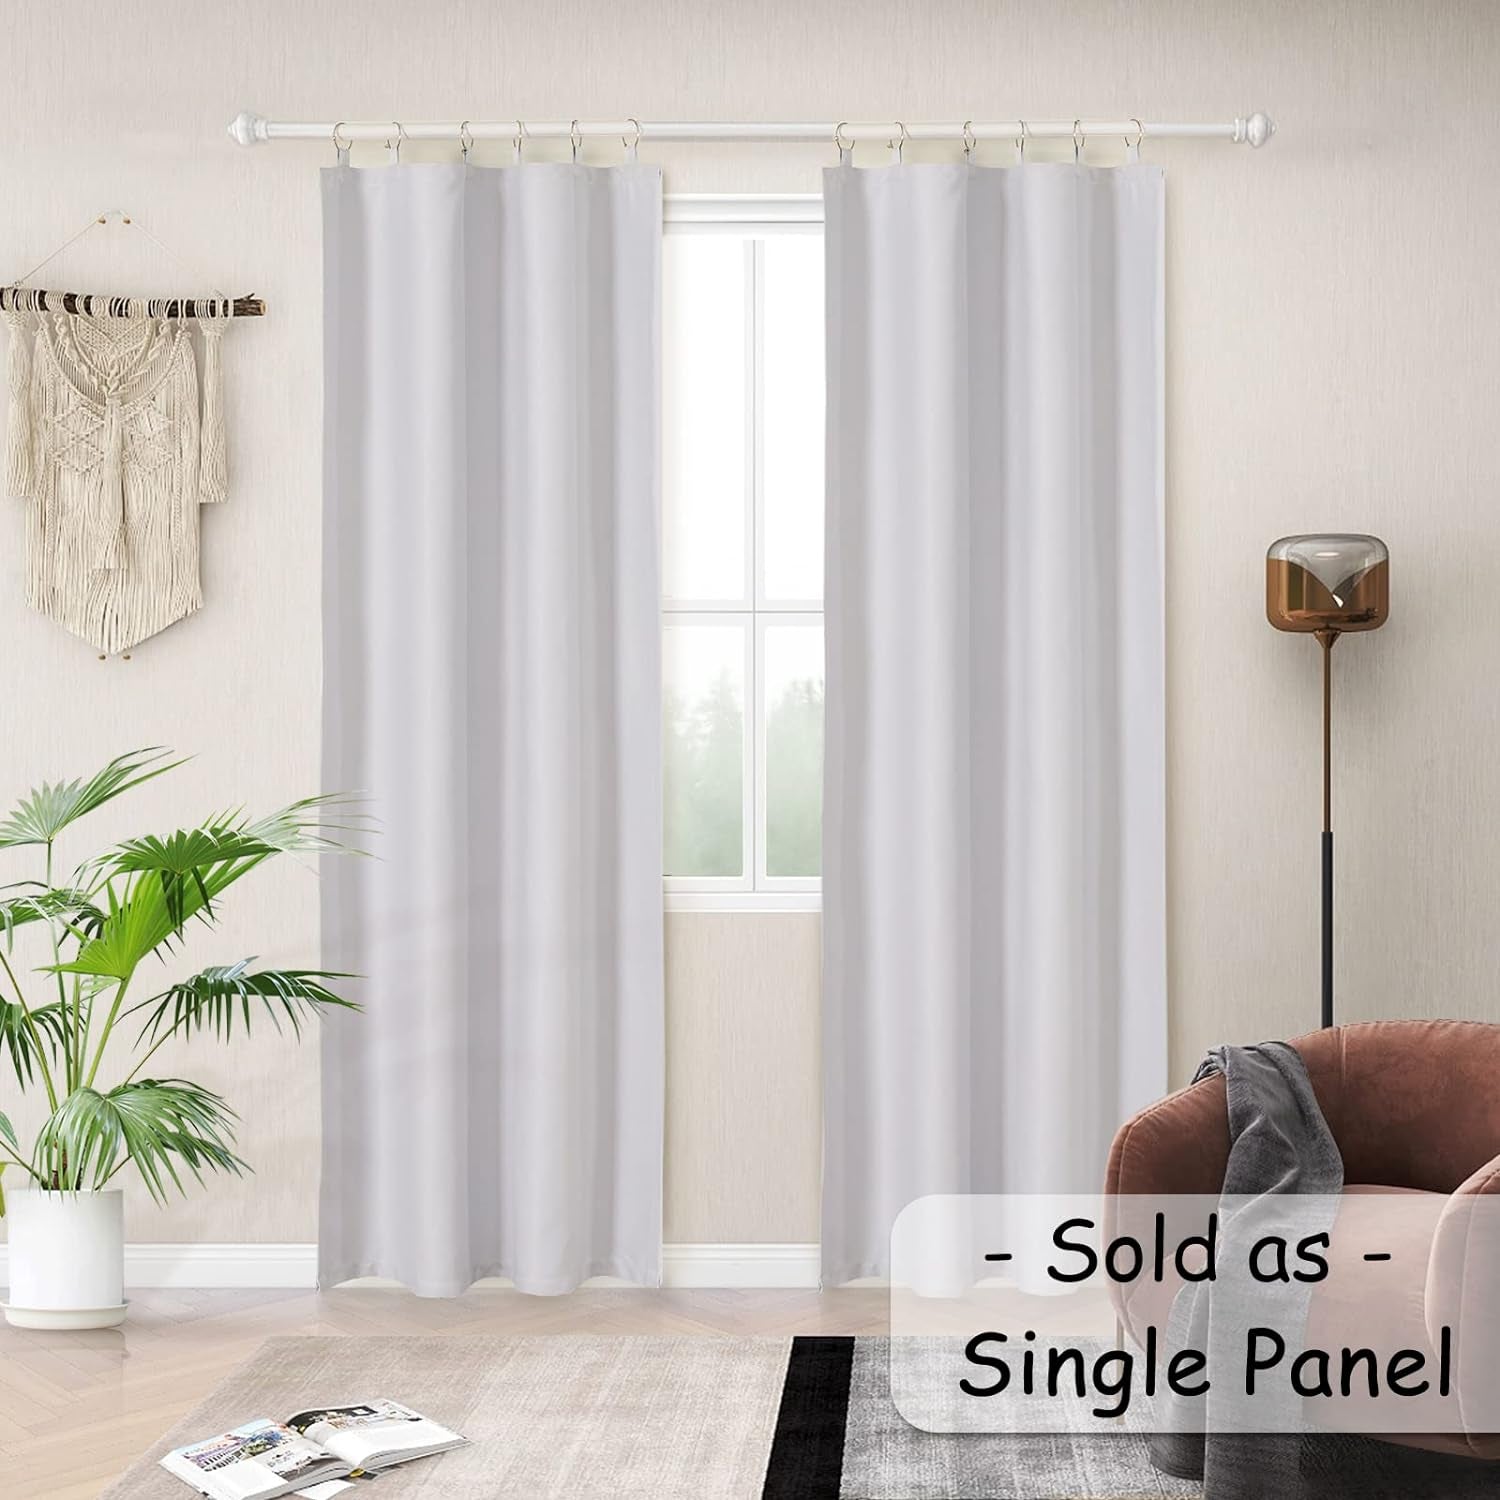 Melodieux Thermal Insulated Room Darkening Curtain Liner for 84 Inch Long Curtains, off White, 40 by 80 Inch, 1 Panel, Rings Included  Melodieux   